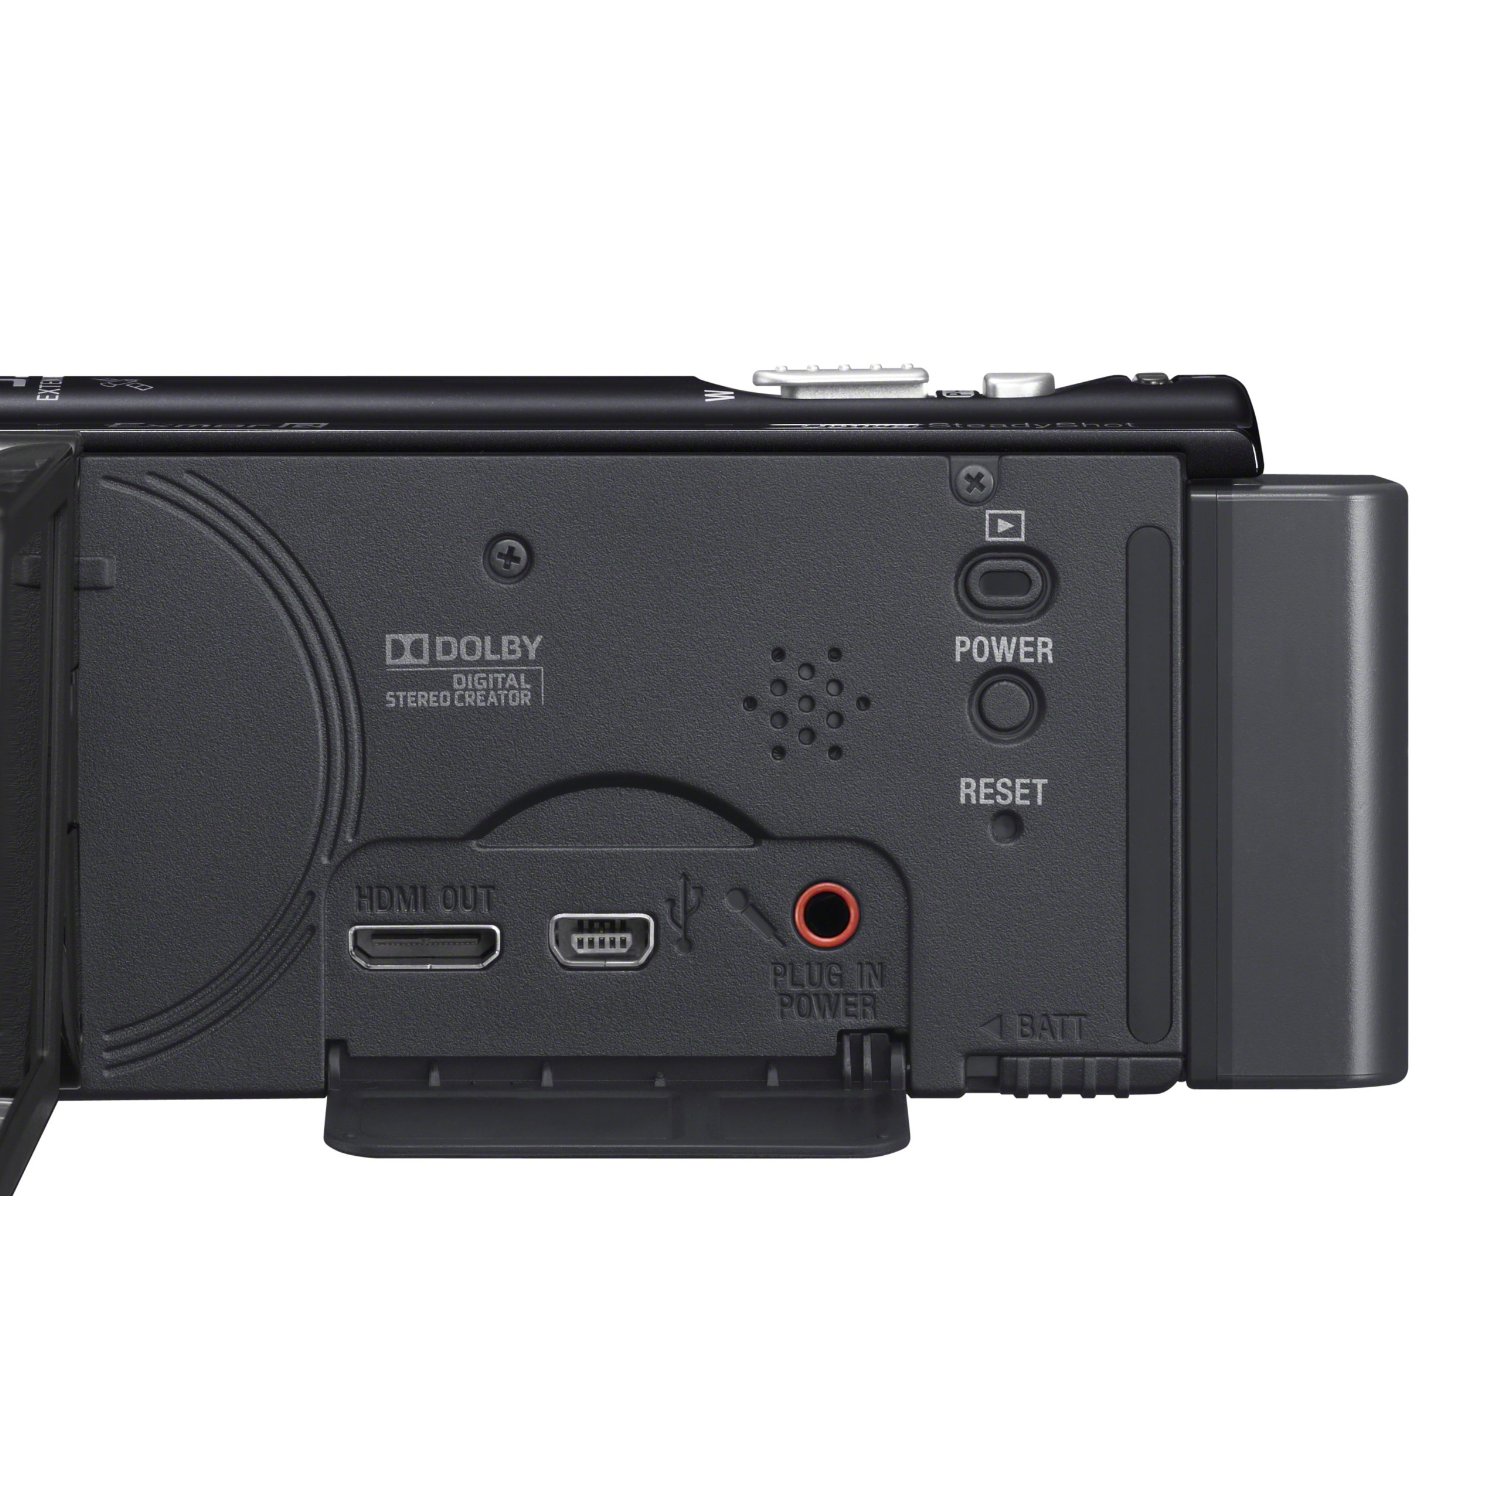 http://thetechjournal.com/wp-content/uploads/images/1205/1336441634-sonys-hdrcx260v-89-mp-camcorder-with-30x-optical-zoom-8.jpg